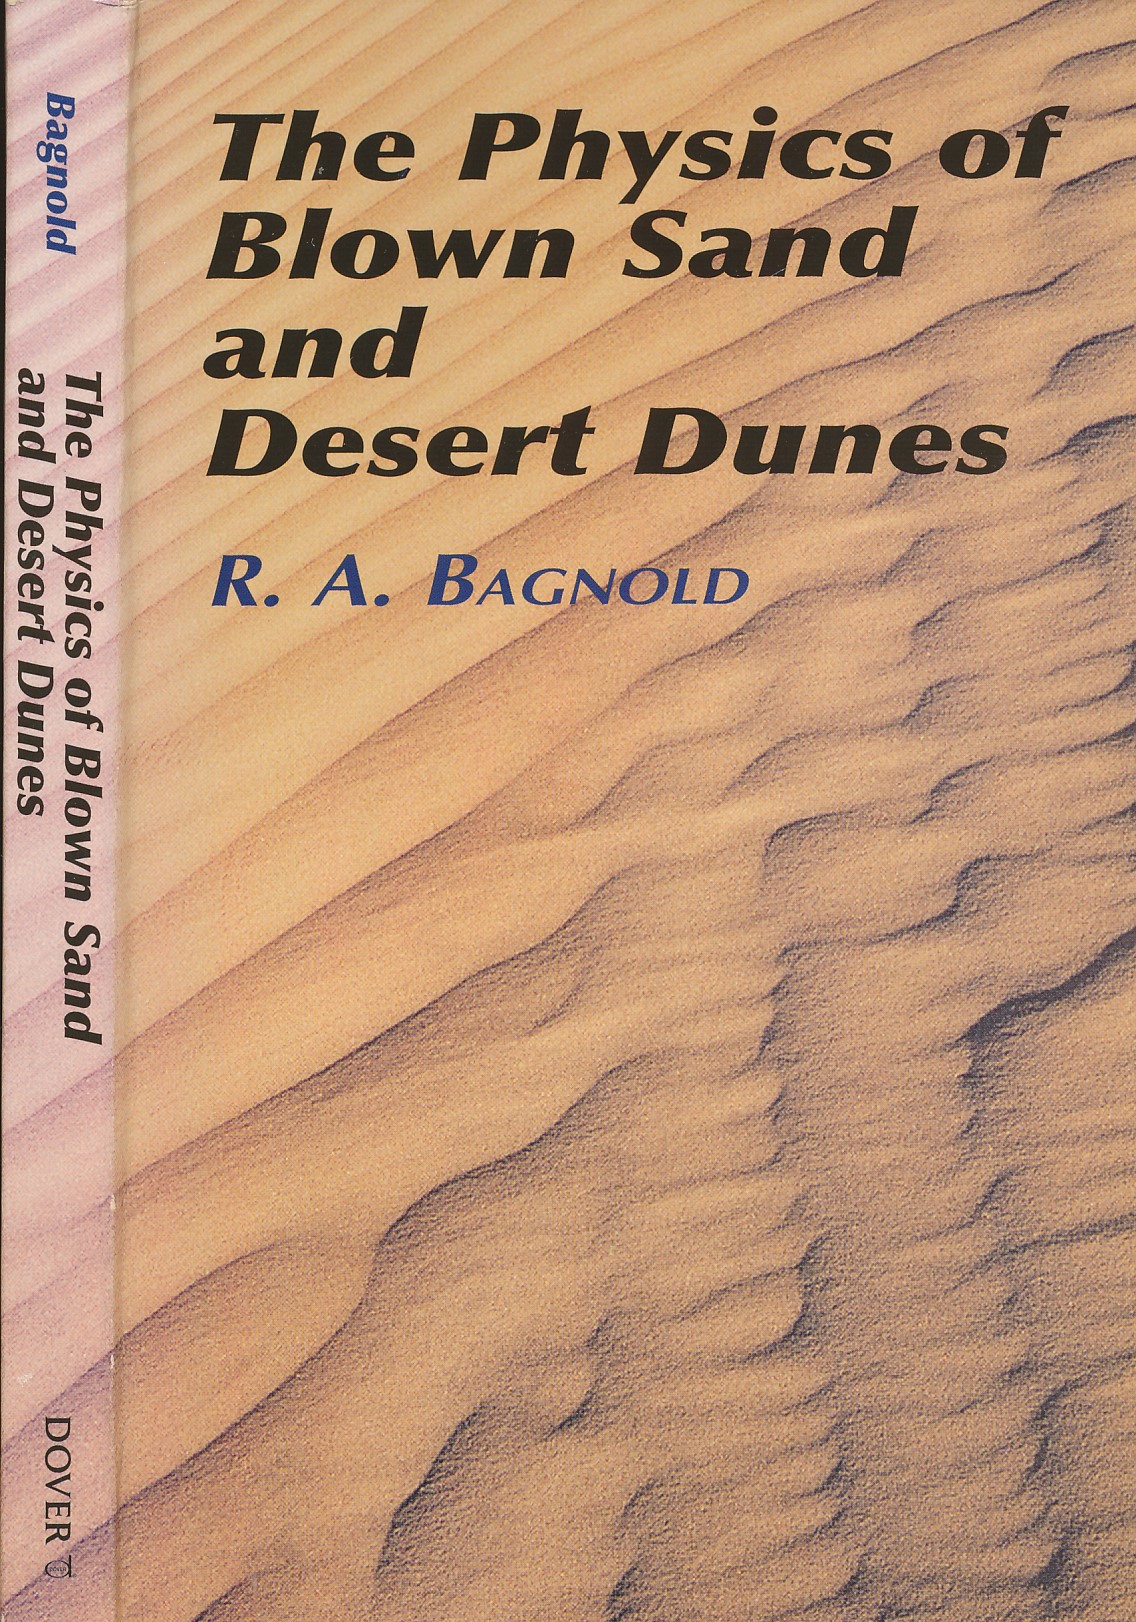 The Physics of Blown Sand and Desert Dunes